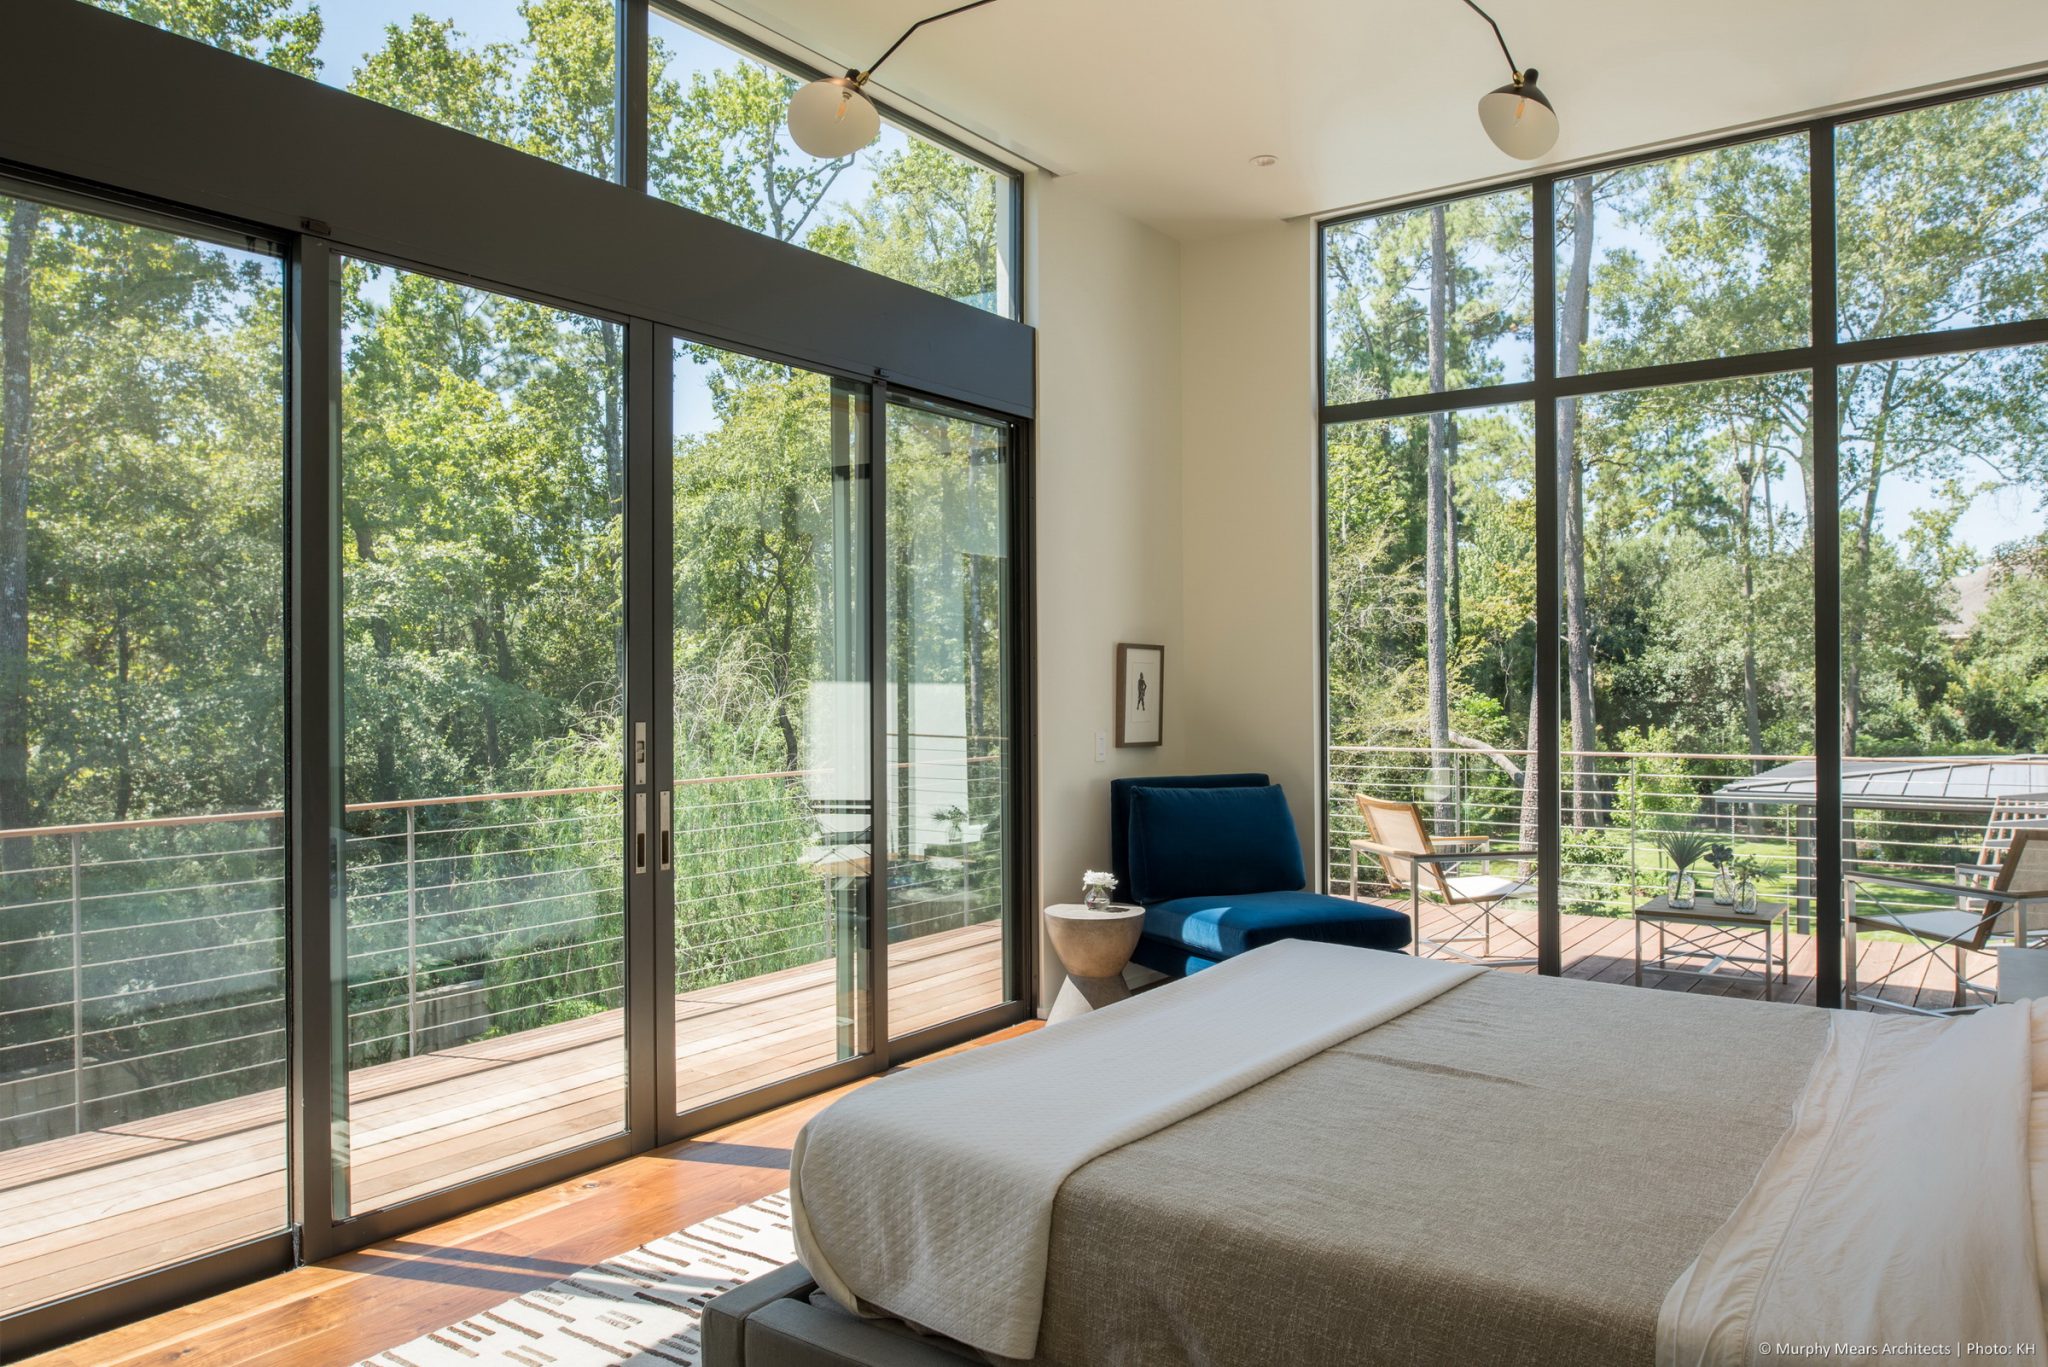 Carlton Woods Residence - Sliding glass doors open up to the wood and steel master balcony which overlooks the dense green backyard landscape.